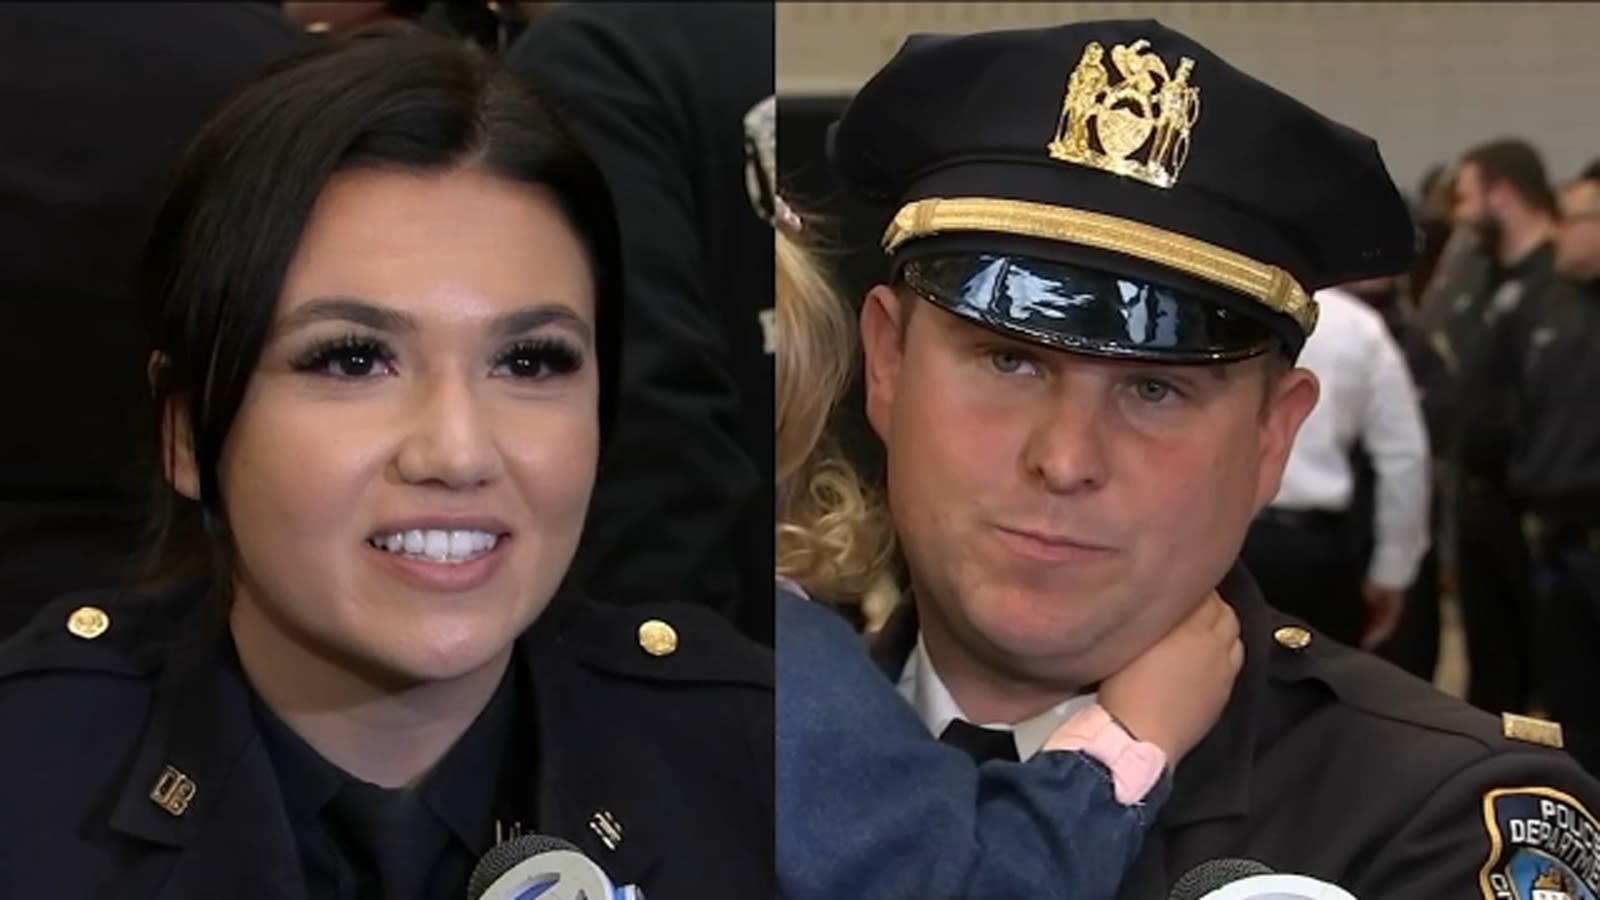 2 NYPD officers whose fathers died in line of duty vow to honor their legacy at promotion ceremony